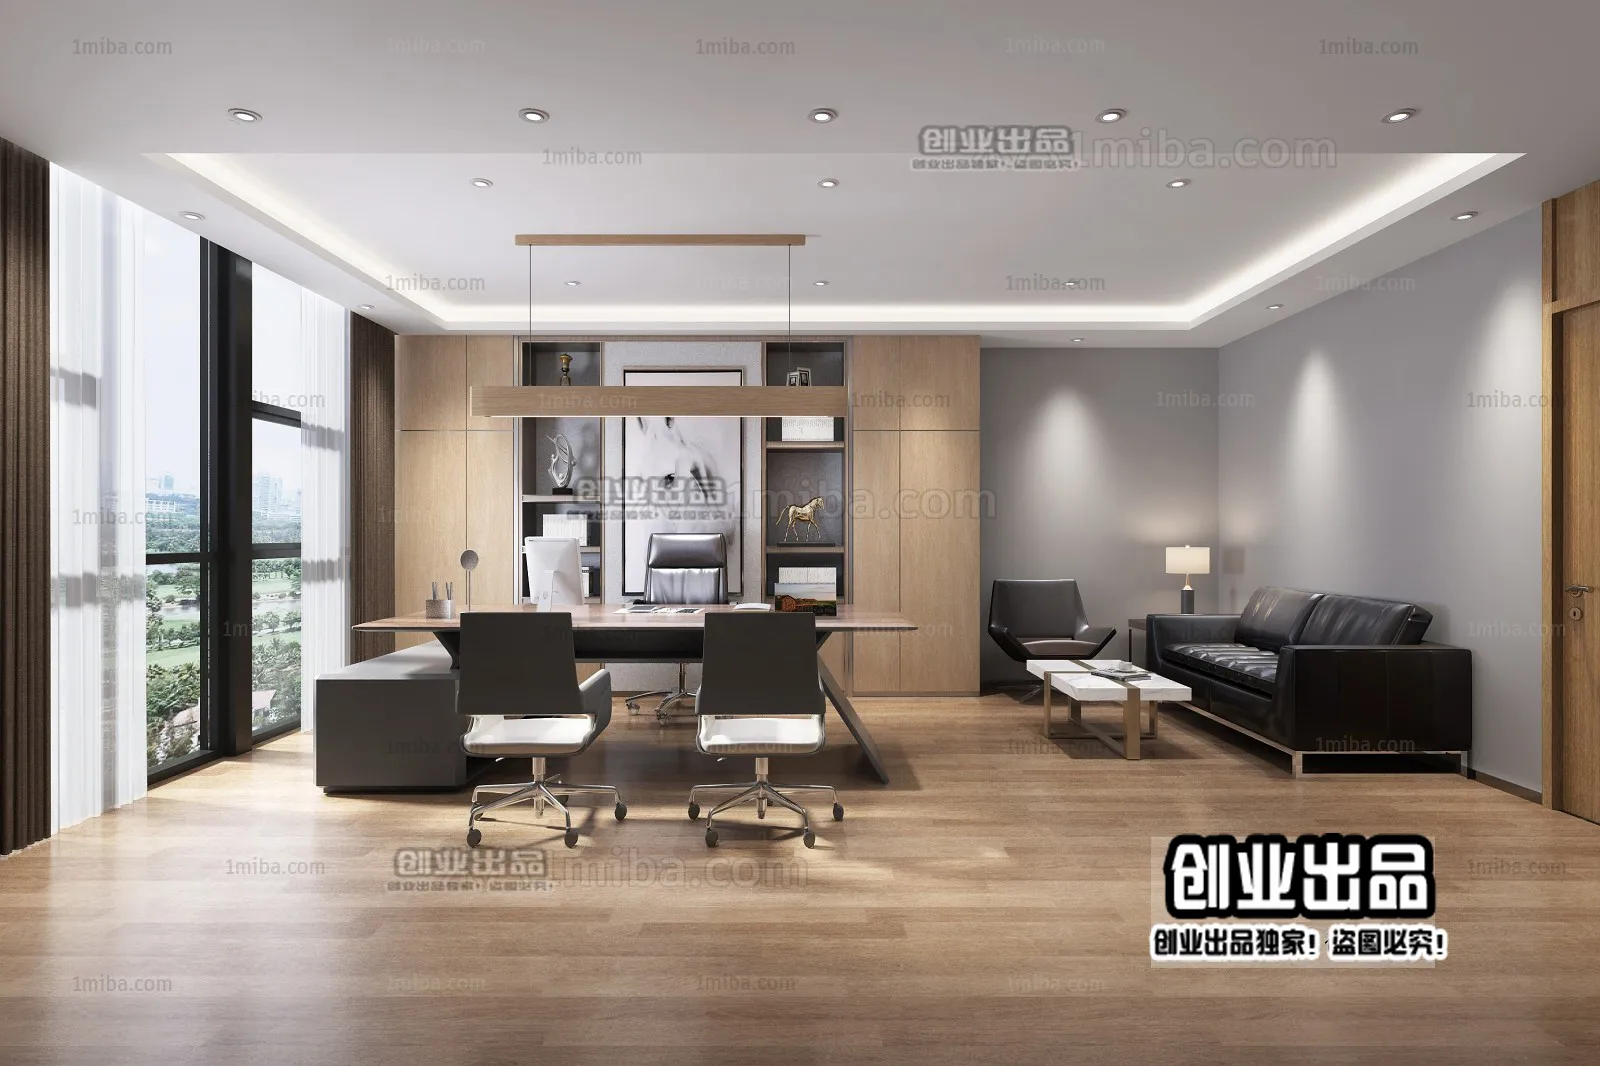 3D OFFICE INTERIOR (VRAY) – MANAGER ROOM 3D SCENES – 180